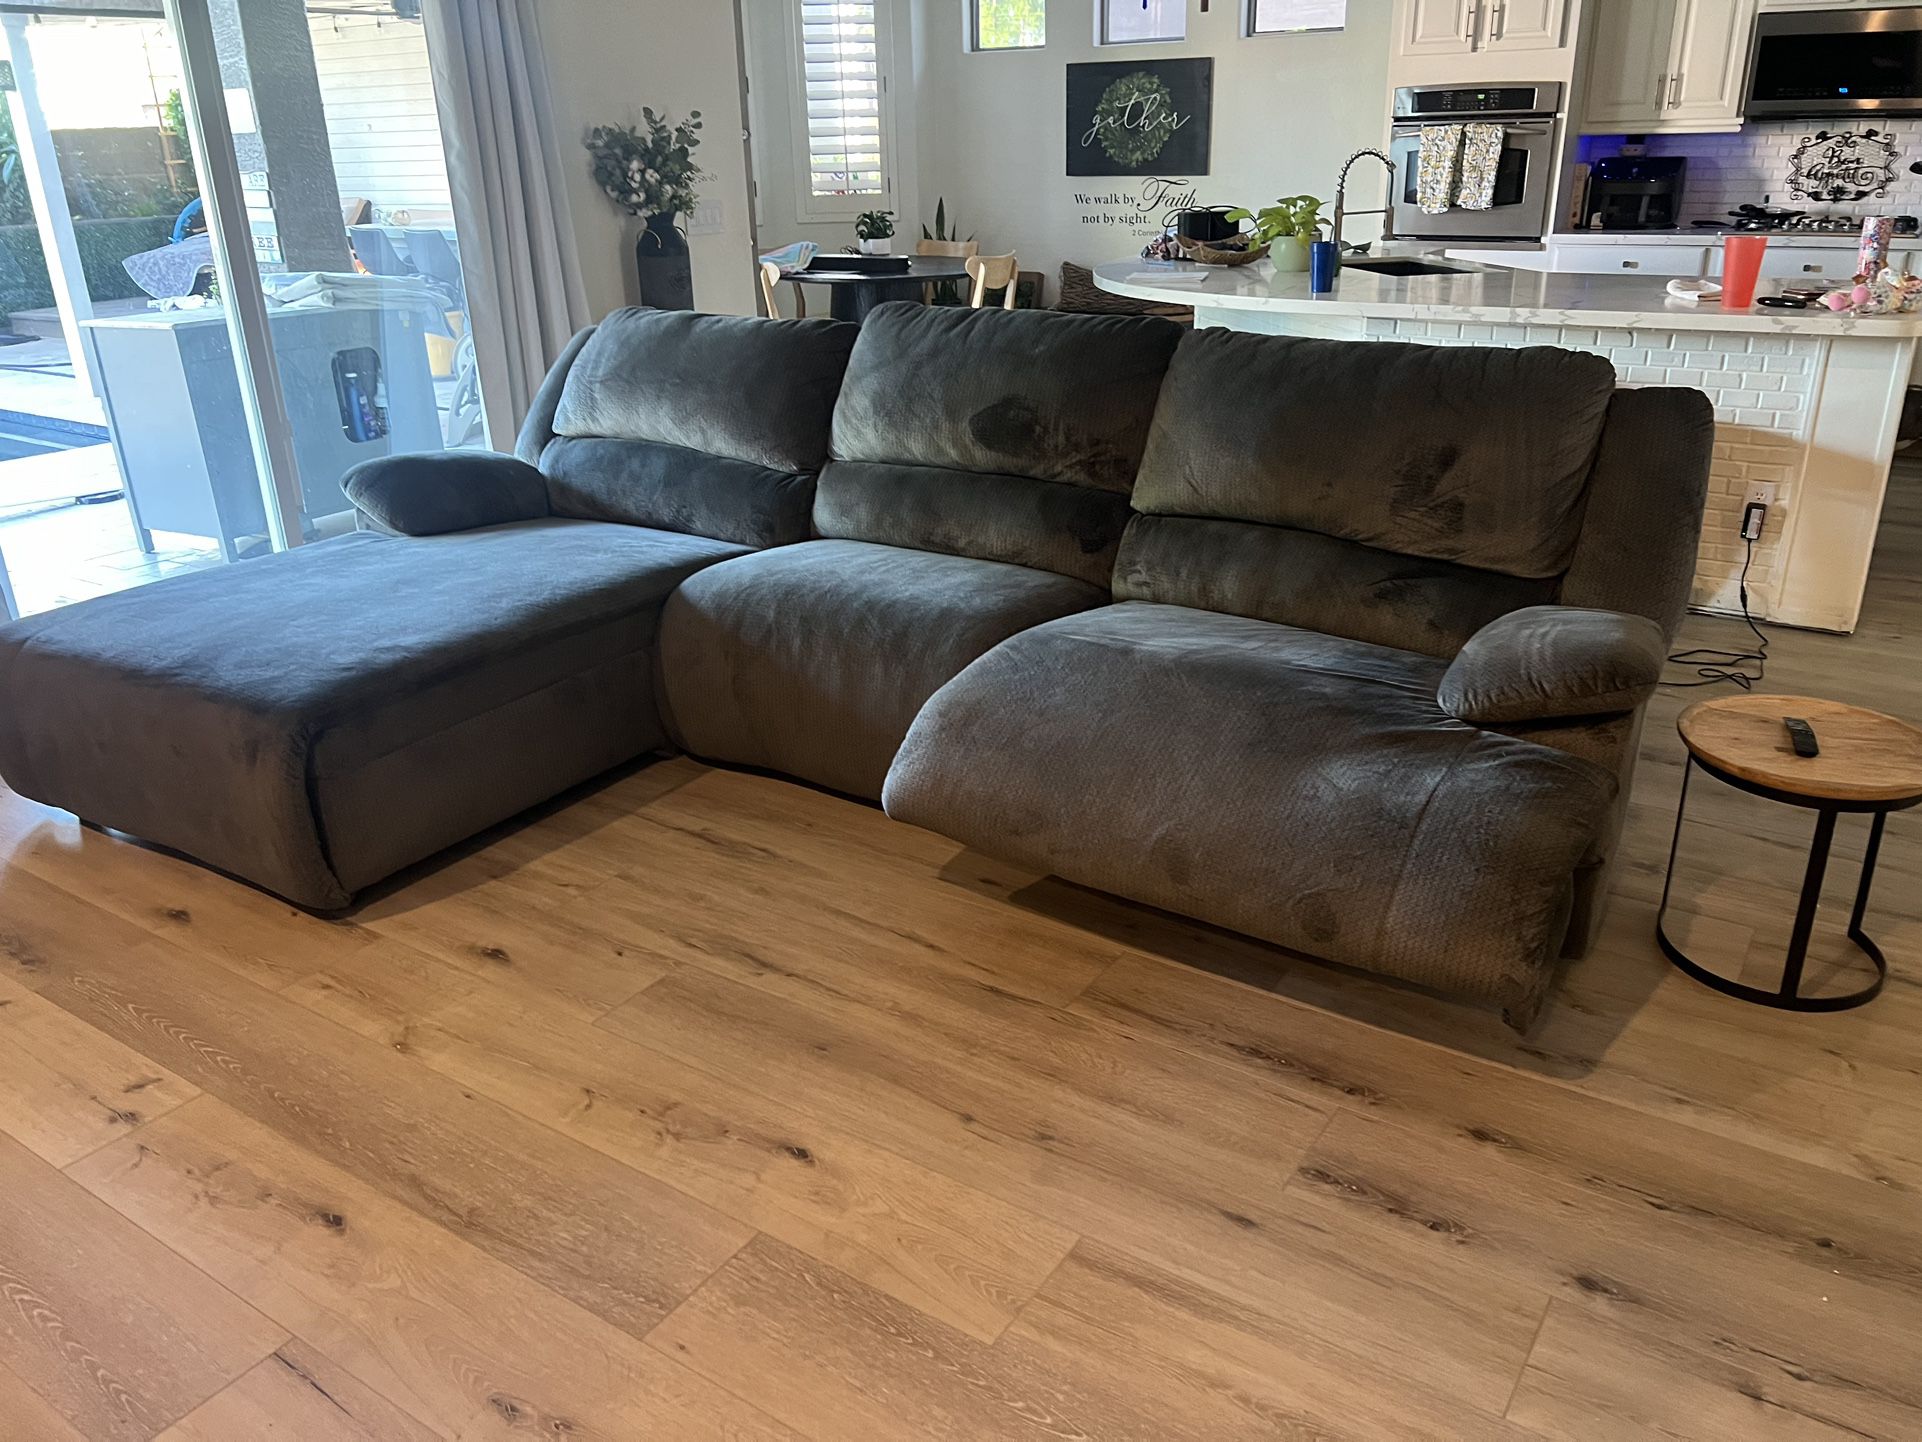 Sofa With Electric Recliners, And Large Recliner Chair